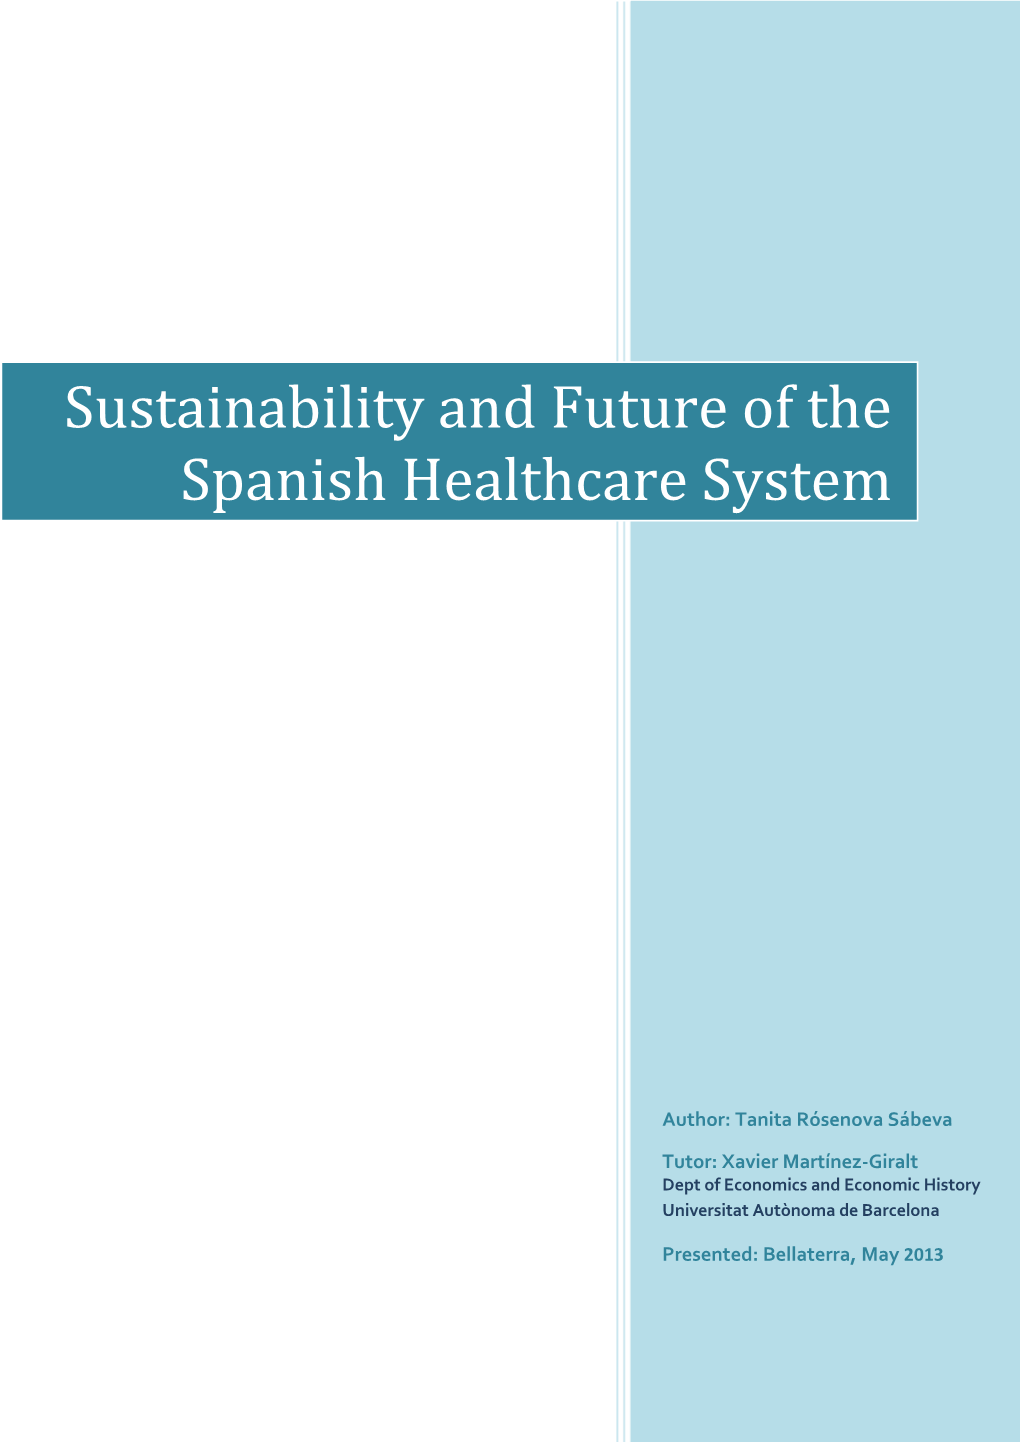 Sustainability and Future of the Spanish Healthcare System